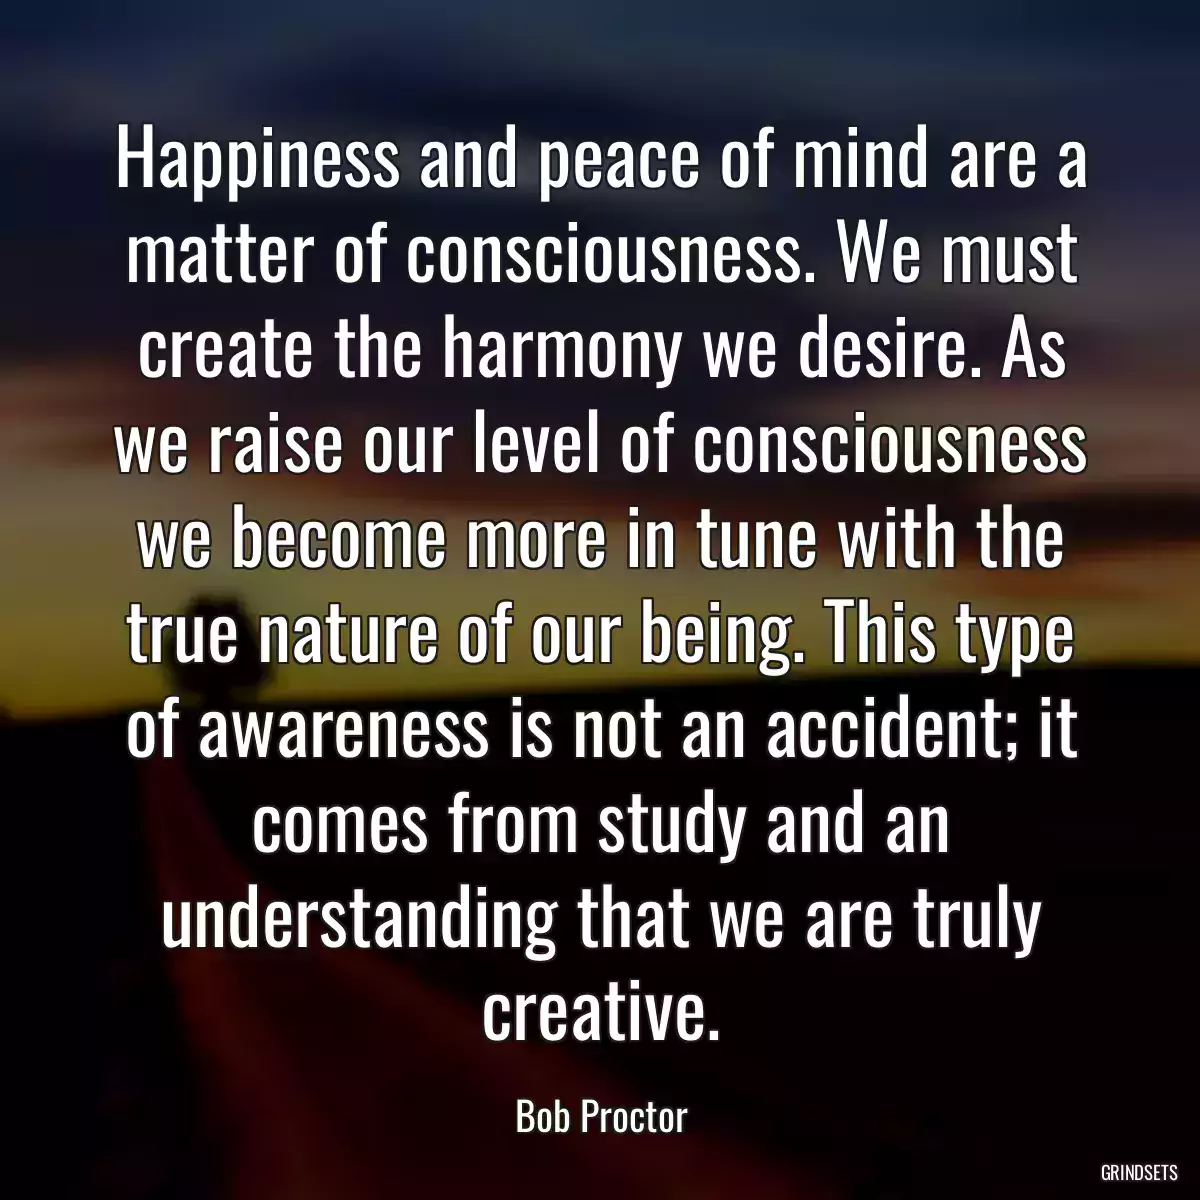 Happiness and peace of mind are a matter of consciousness. We must create the harmony we desire. As we raise our level of consciousness we become more in tune with the true nature of our being. This type of awareness is not an accident; it comes from study and an understanding that we are truly creative.